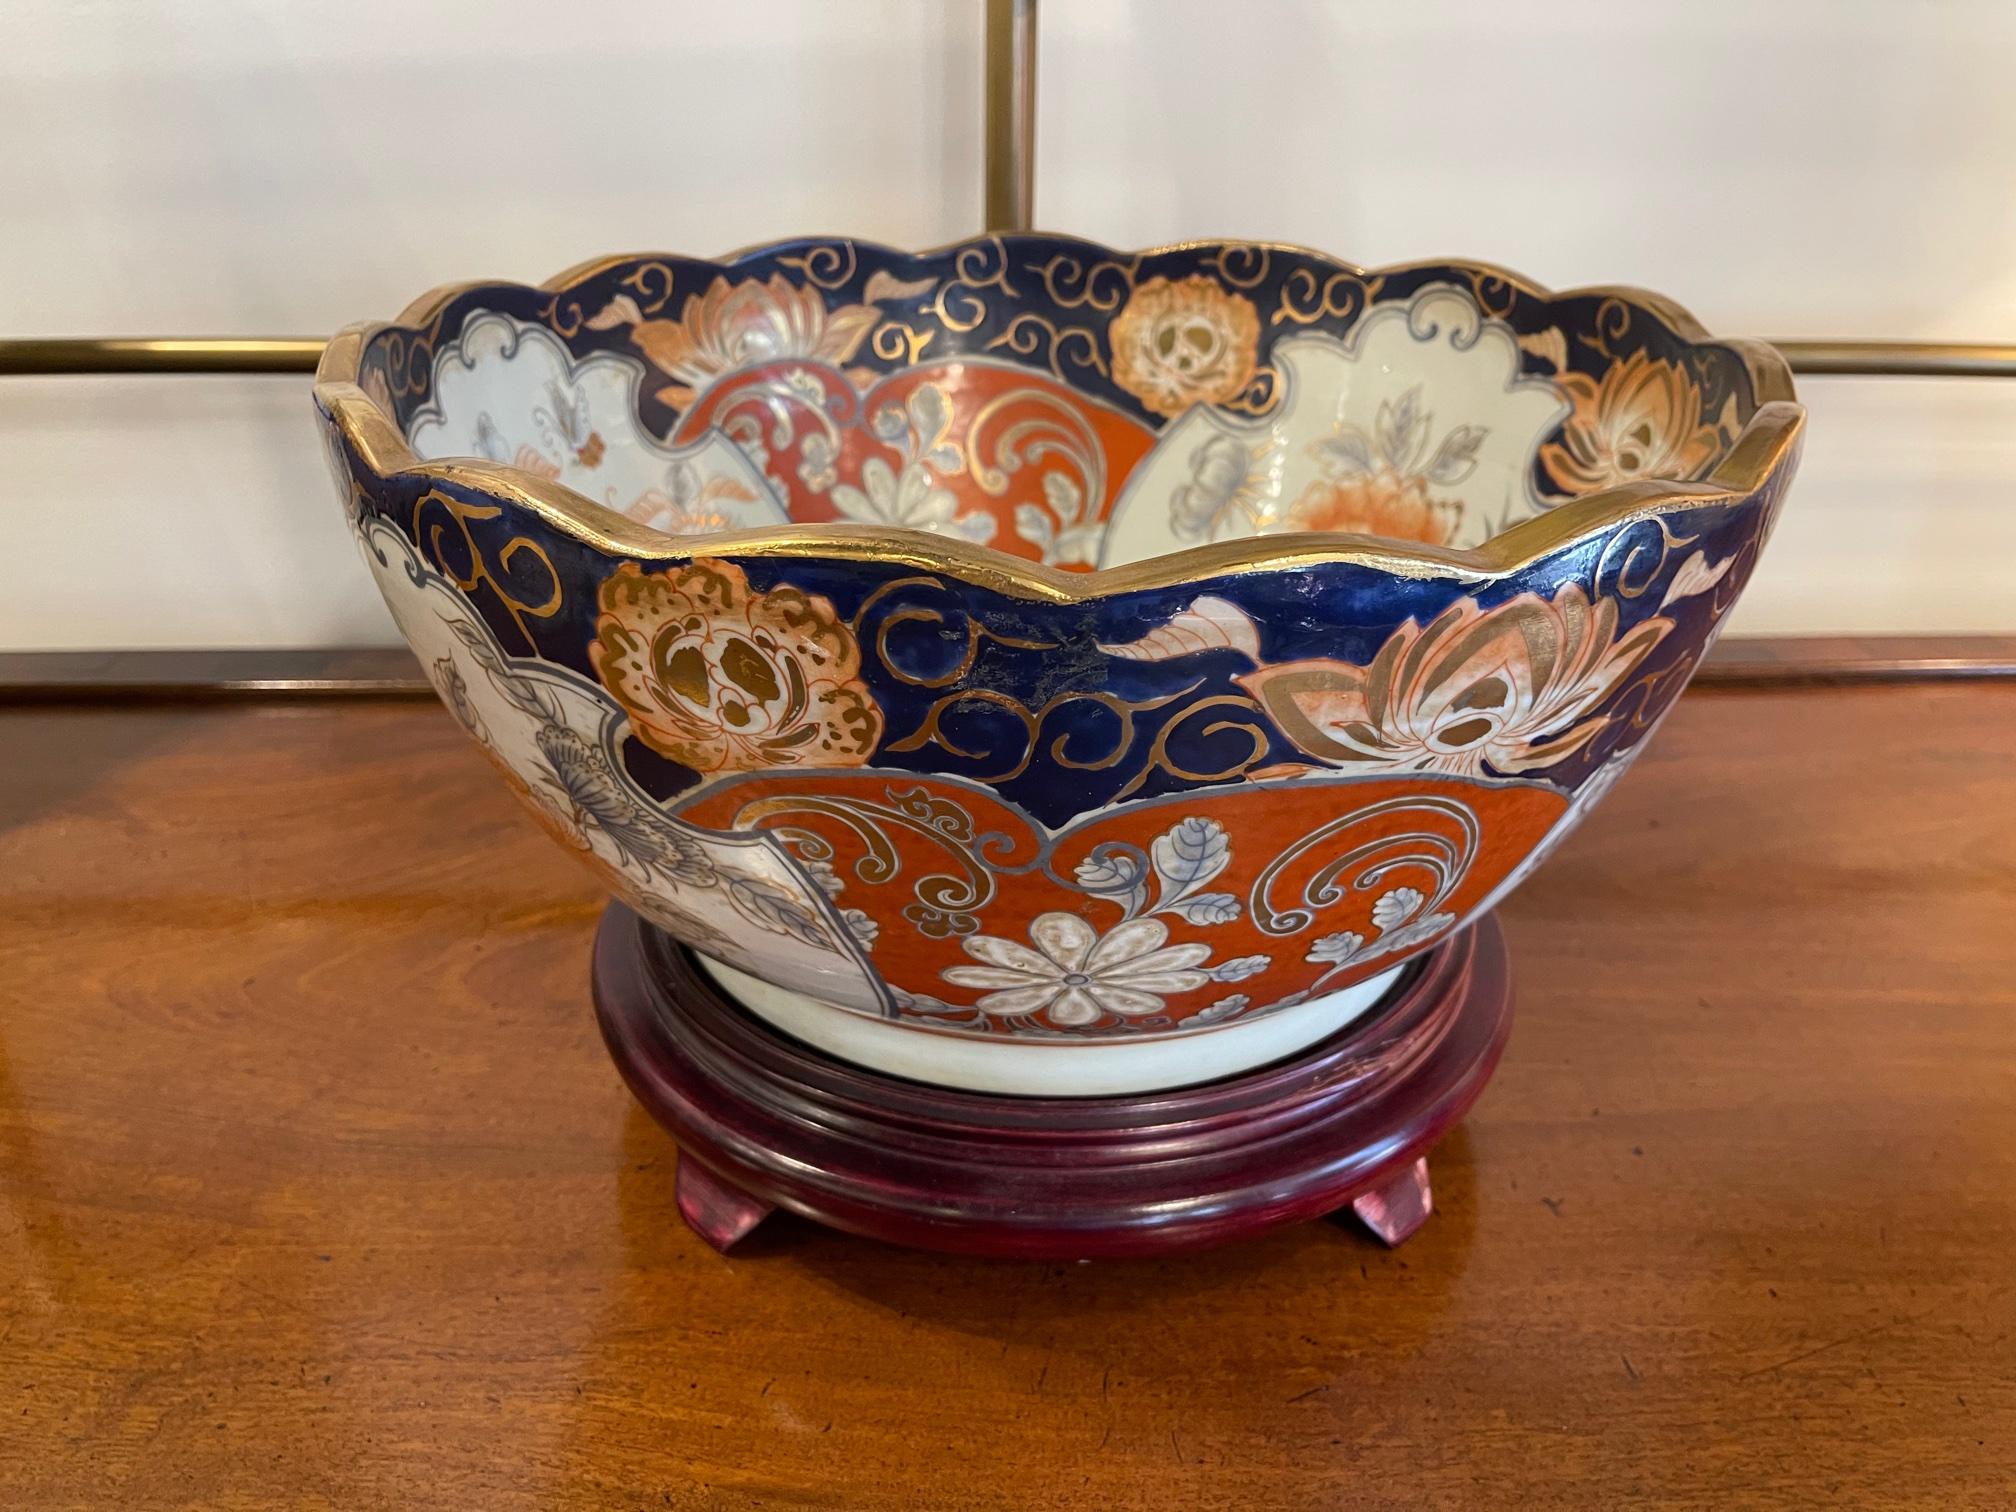 Imari style center or punch bowl on wood stand, 20th century. Originally purchased from Gumps Not for food use. 10.25